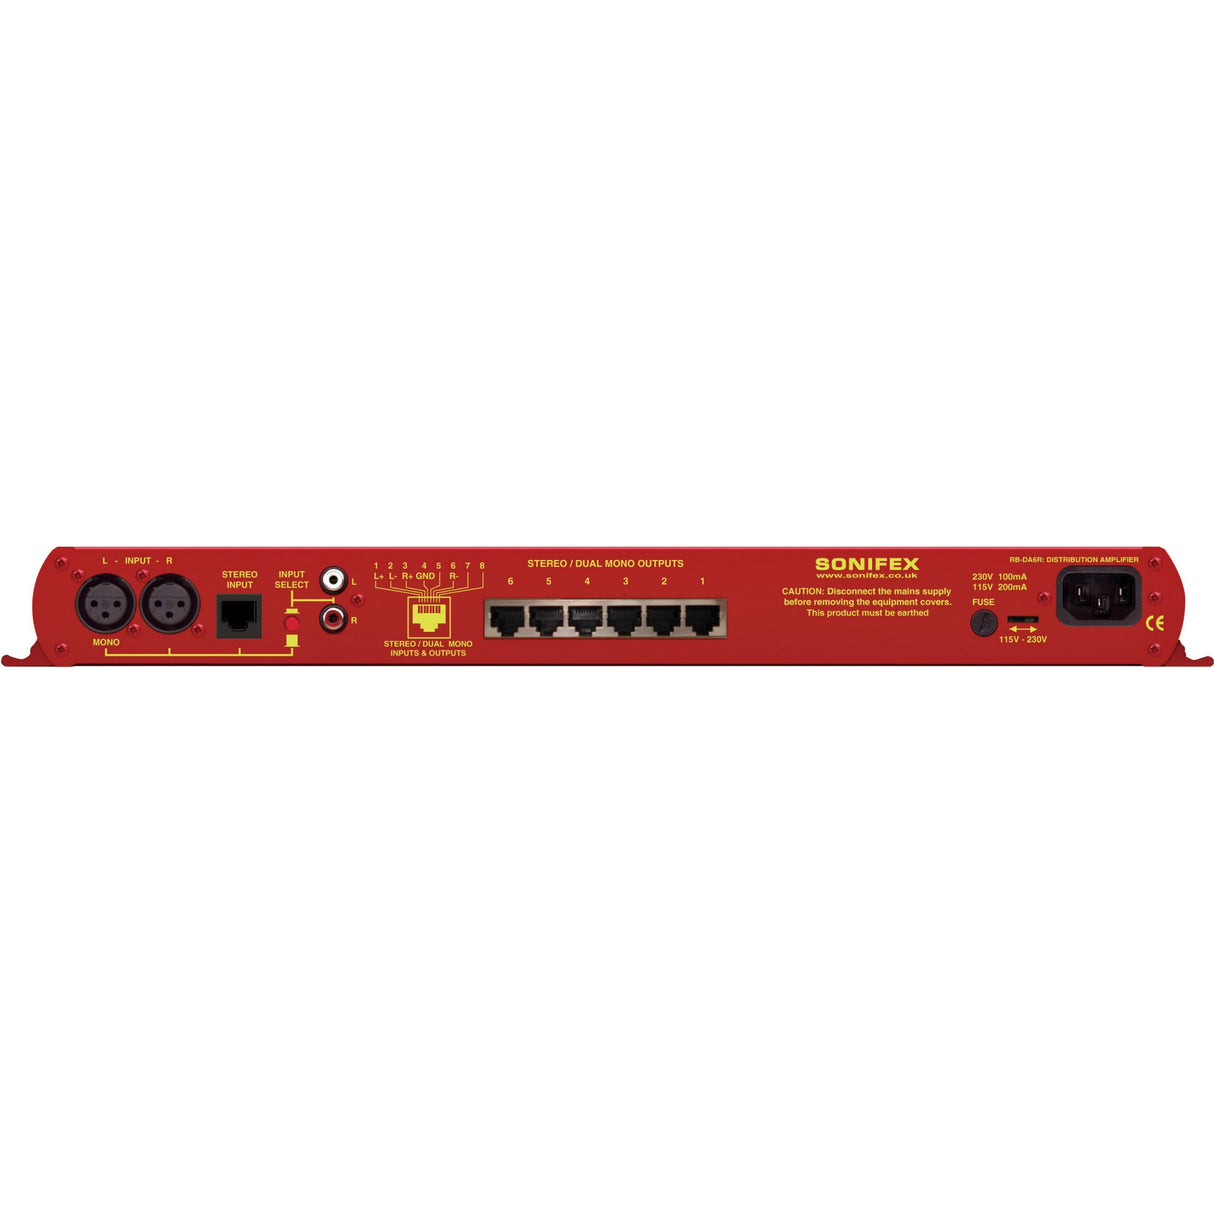 Sonifex RB-DA6R 6-Way Stereo Distribution Amplifier with RJ45 Connectors